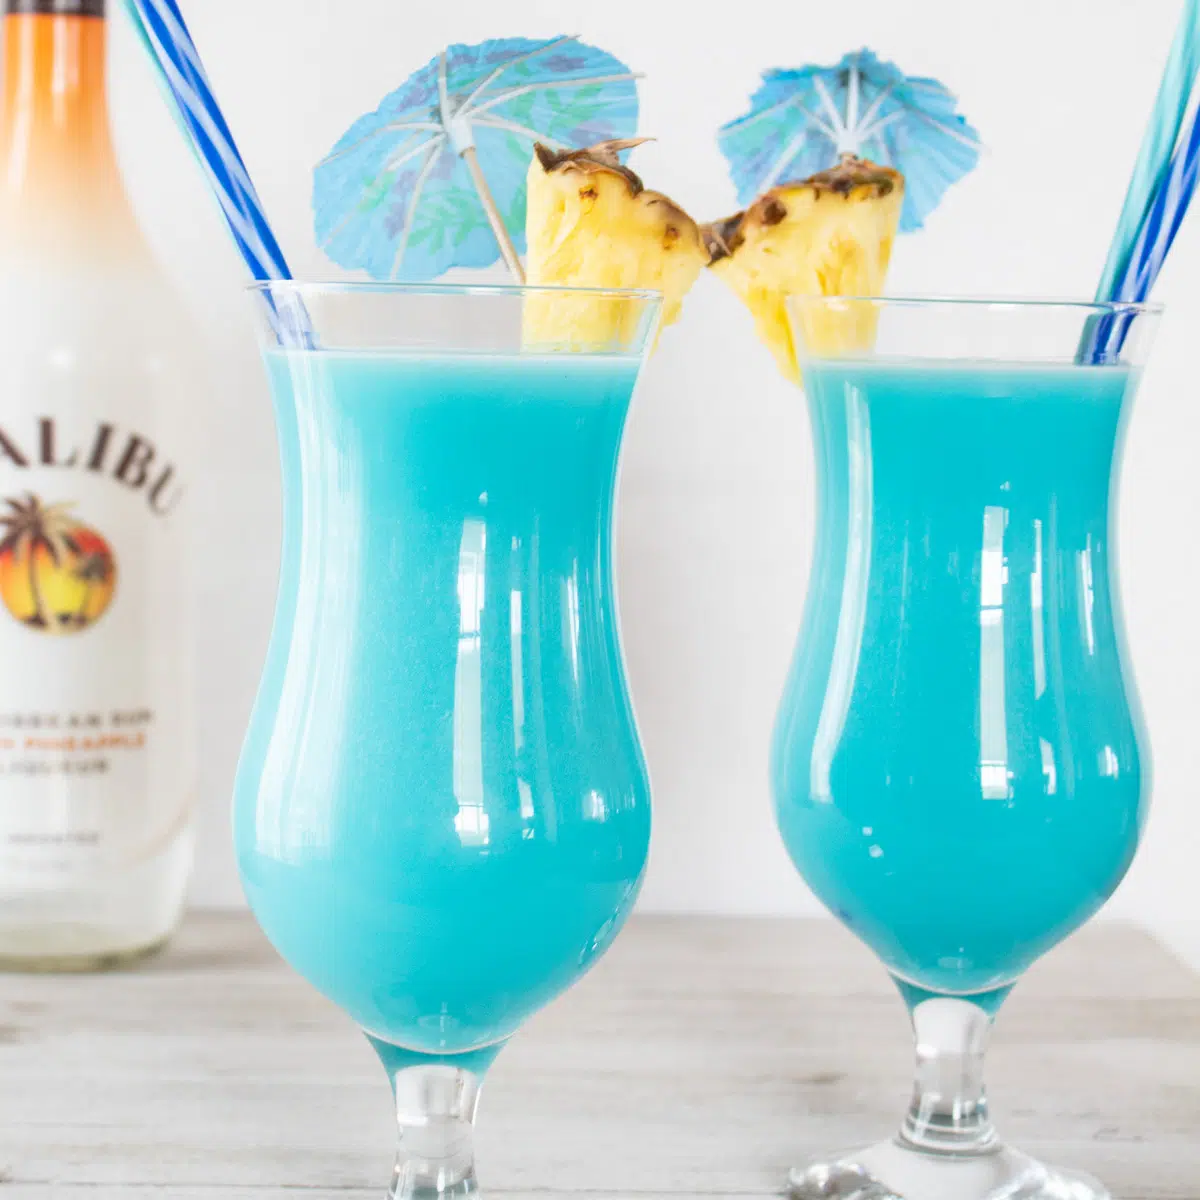 Frozen blue hawaiian cocktail served in hurrican glasses with pineapple garnish.